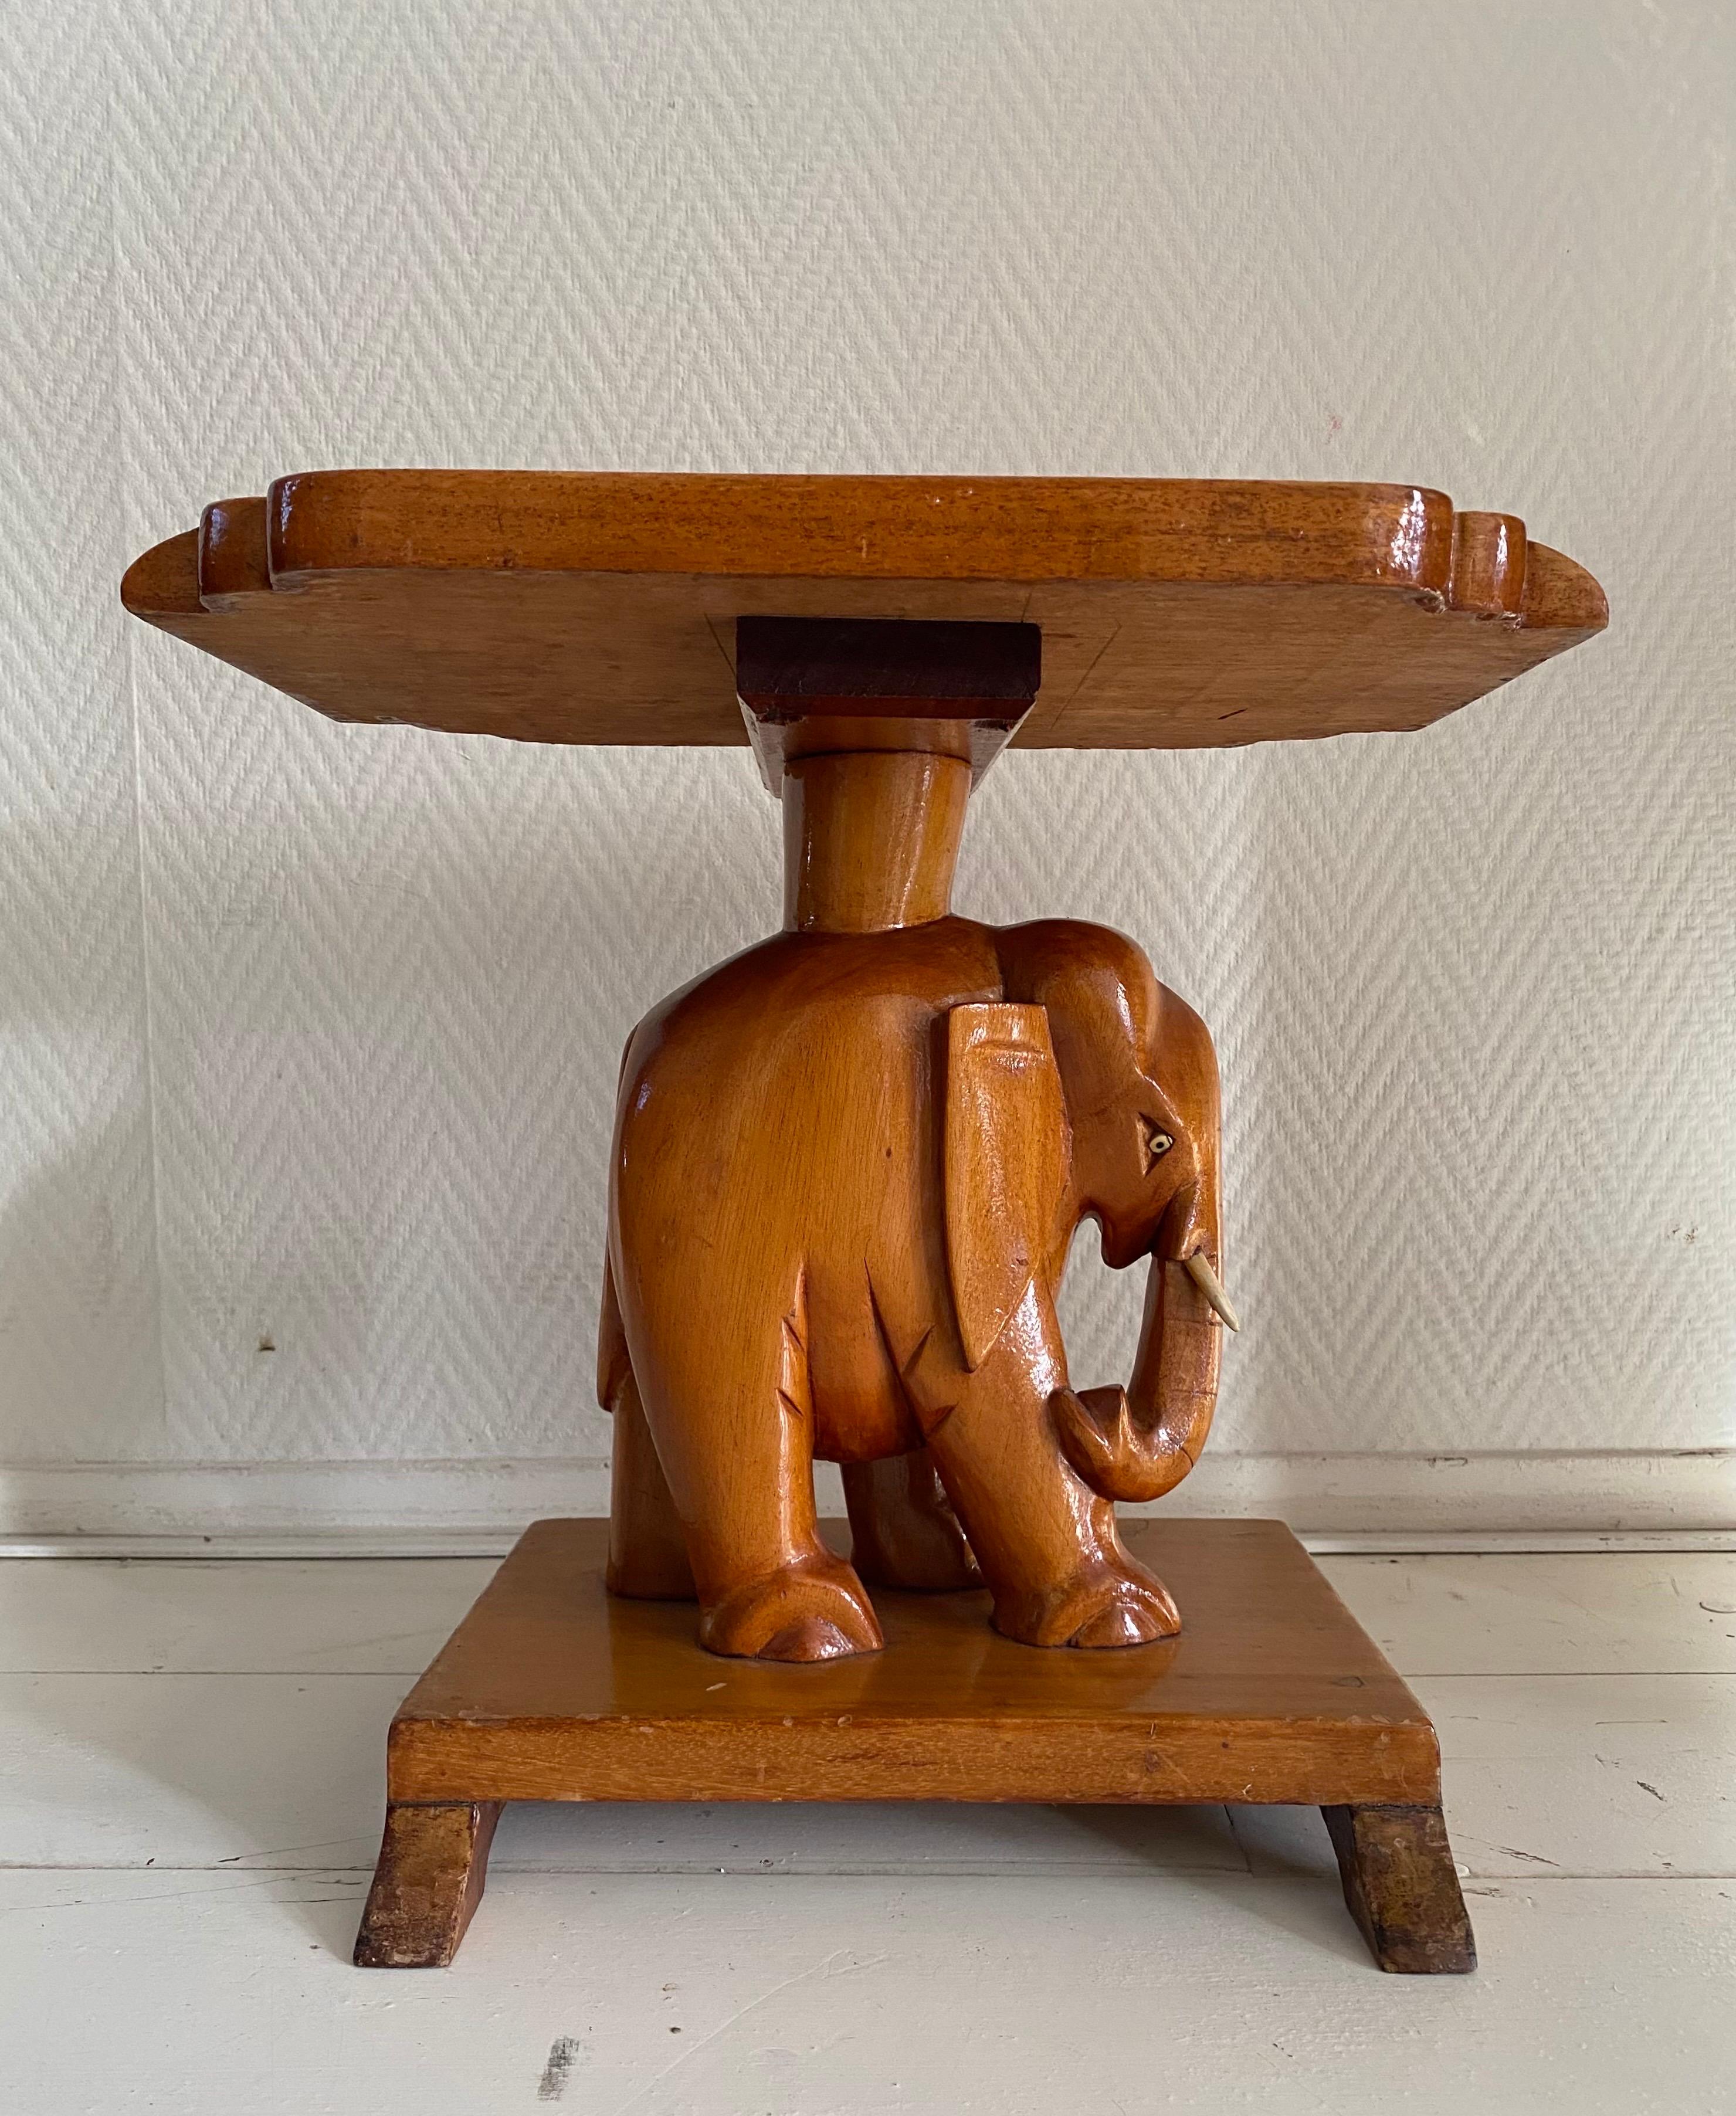 Wonderful  Mid-Century Modern and Hand-Carved Elephant Side Table.
The table was made from teak wood and lacquered.  It remains in a good vintage condition with some signs of age and use, see photo's. Great Bohemian style!